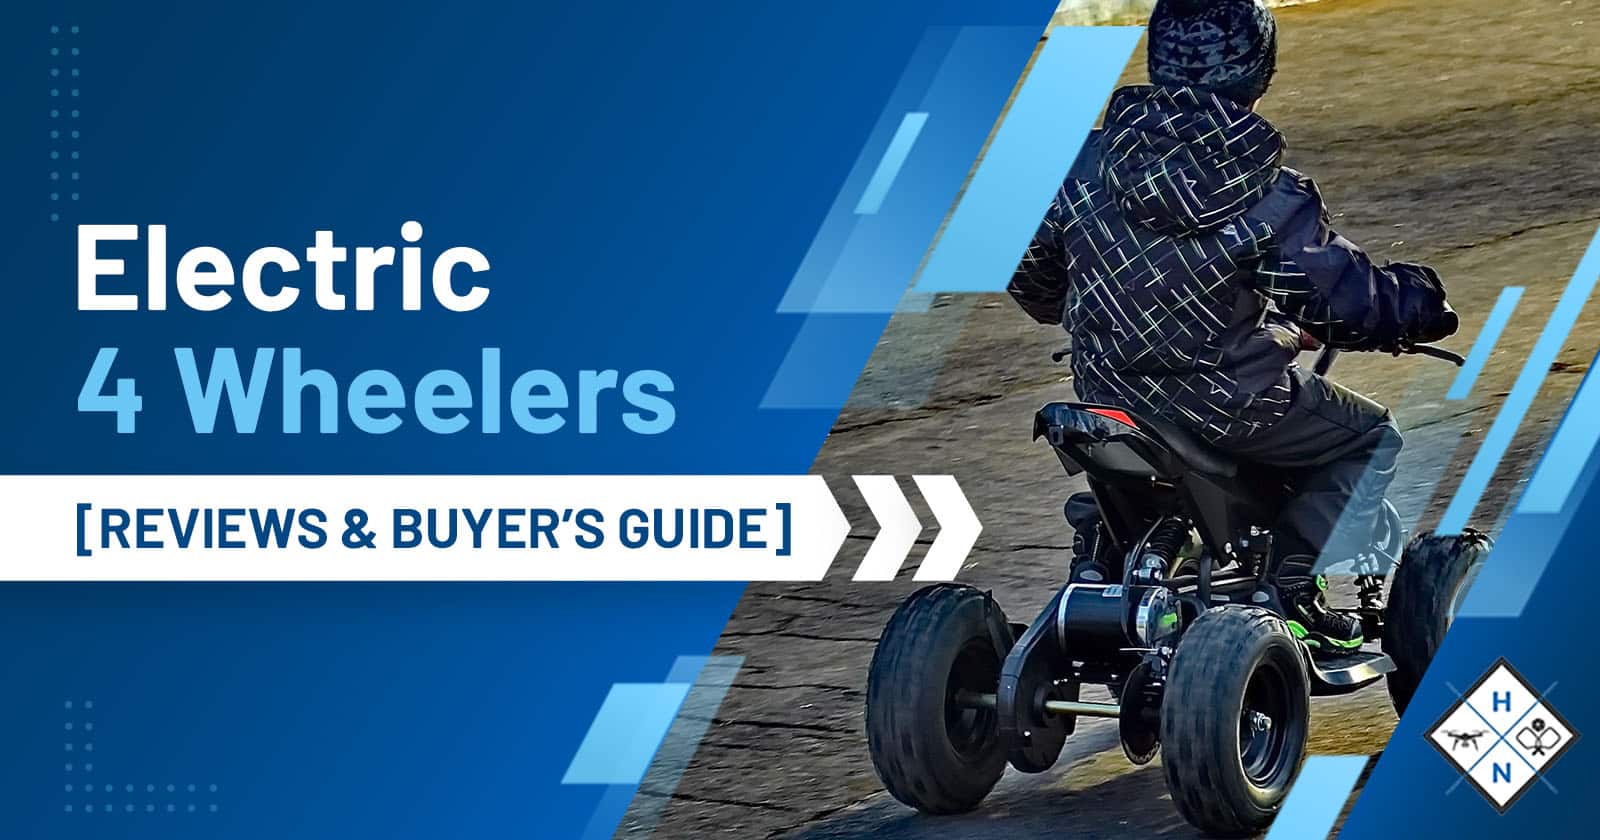 Electric 4 Wheelers [REVIEWS & BUYER'S GUIDE]